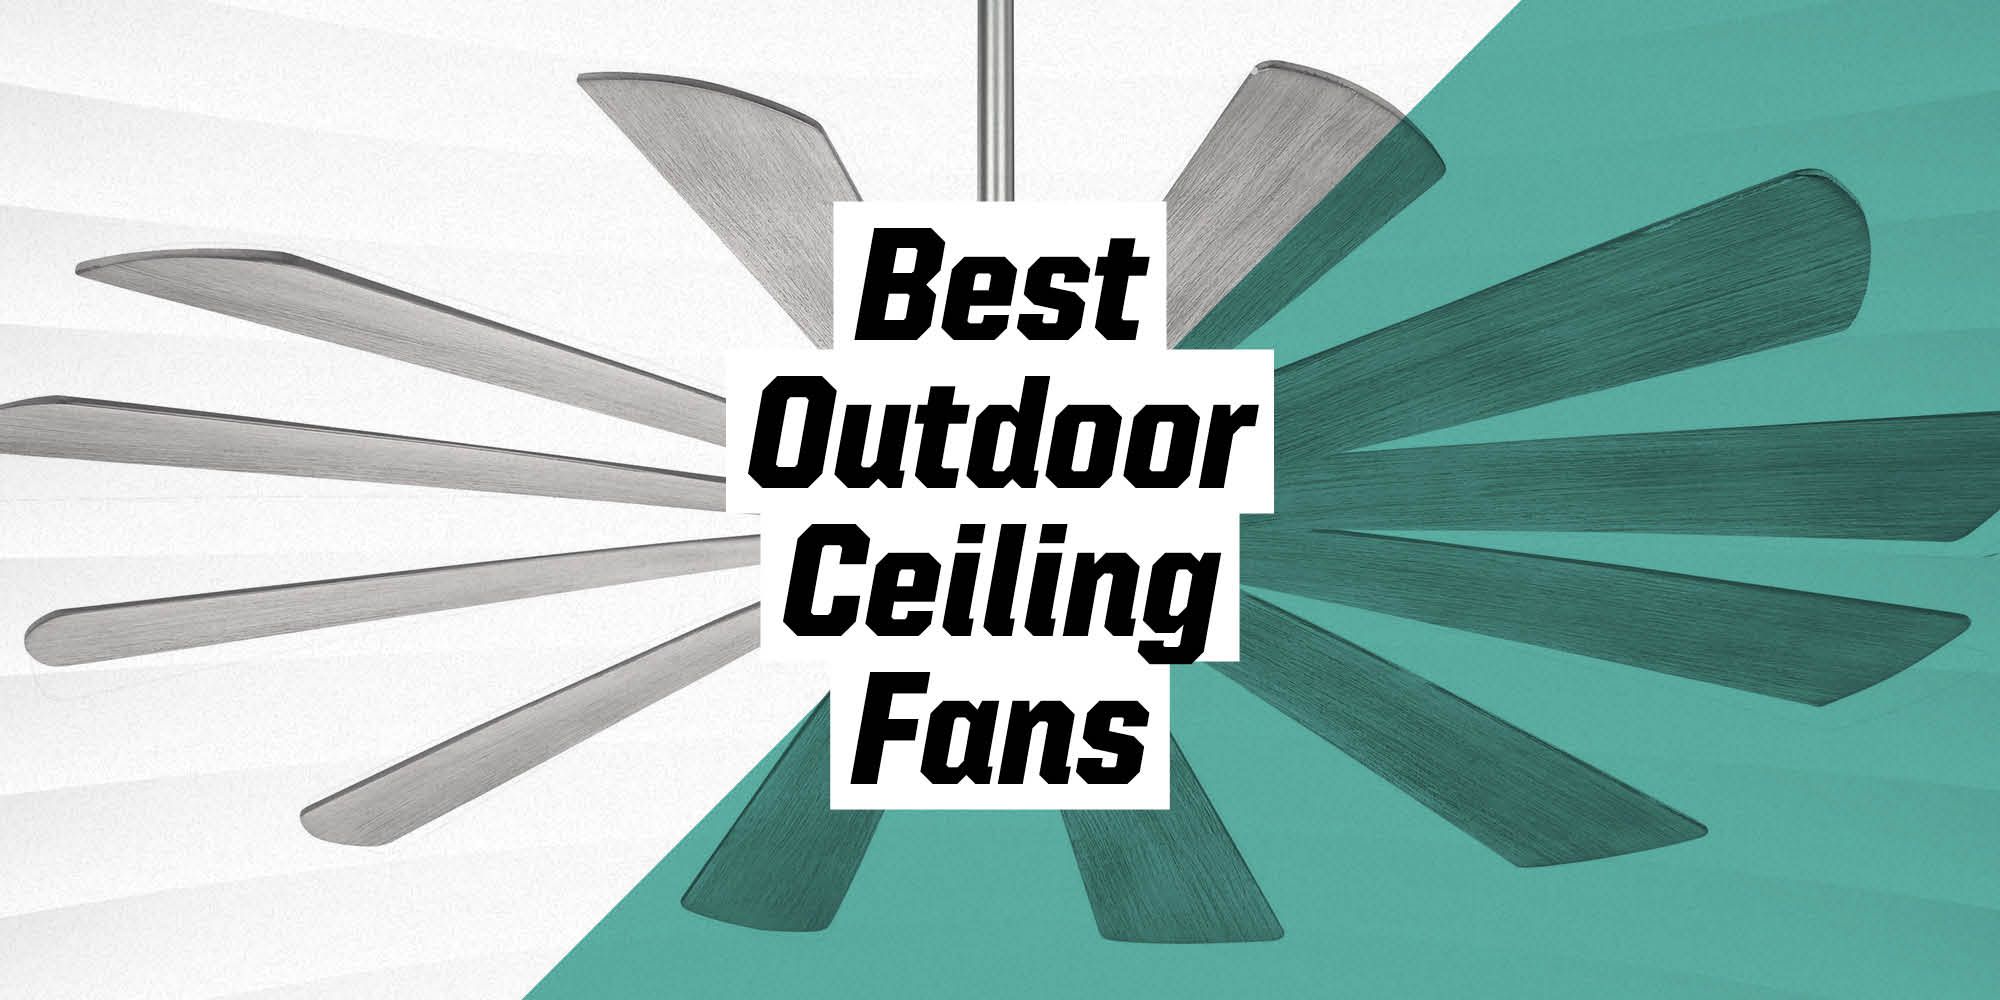 The 9 Best Outdoor Ceiling Fans 2021 For Outdoors - Best Outdoor Wet Rated Ceiling Fan